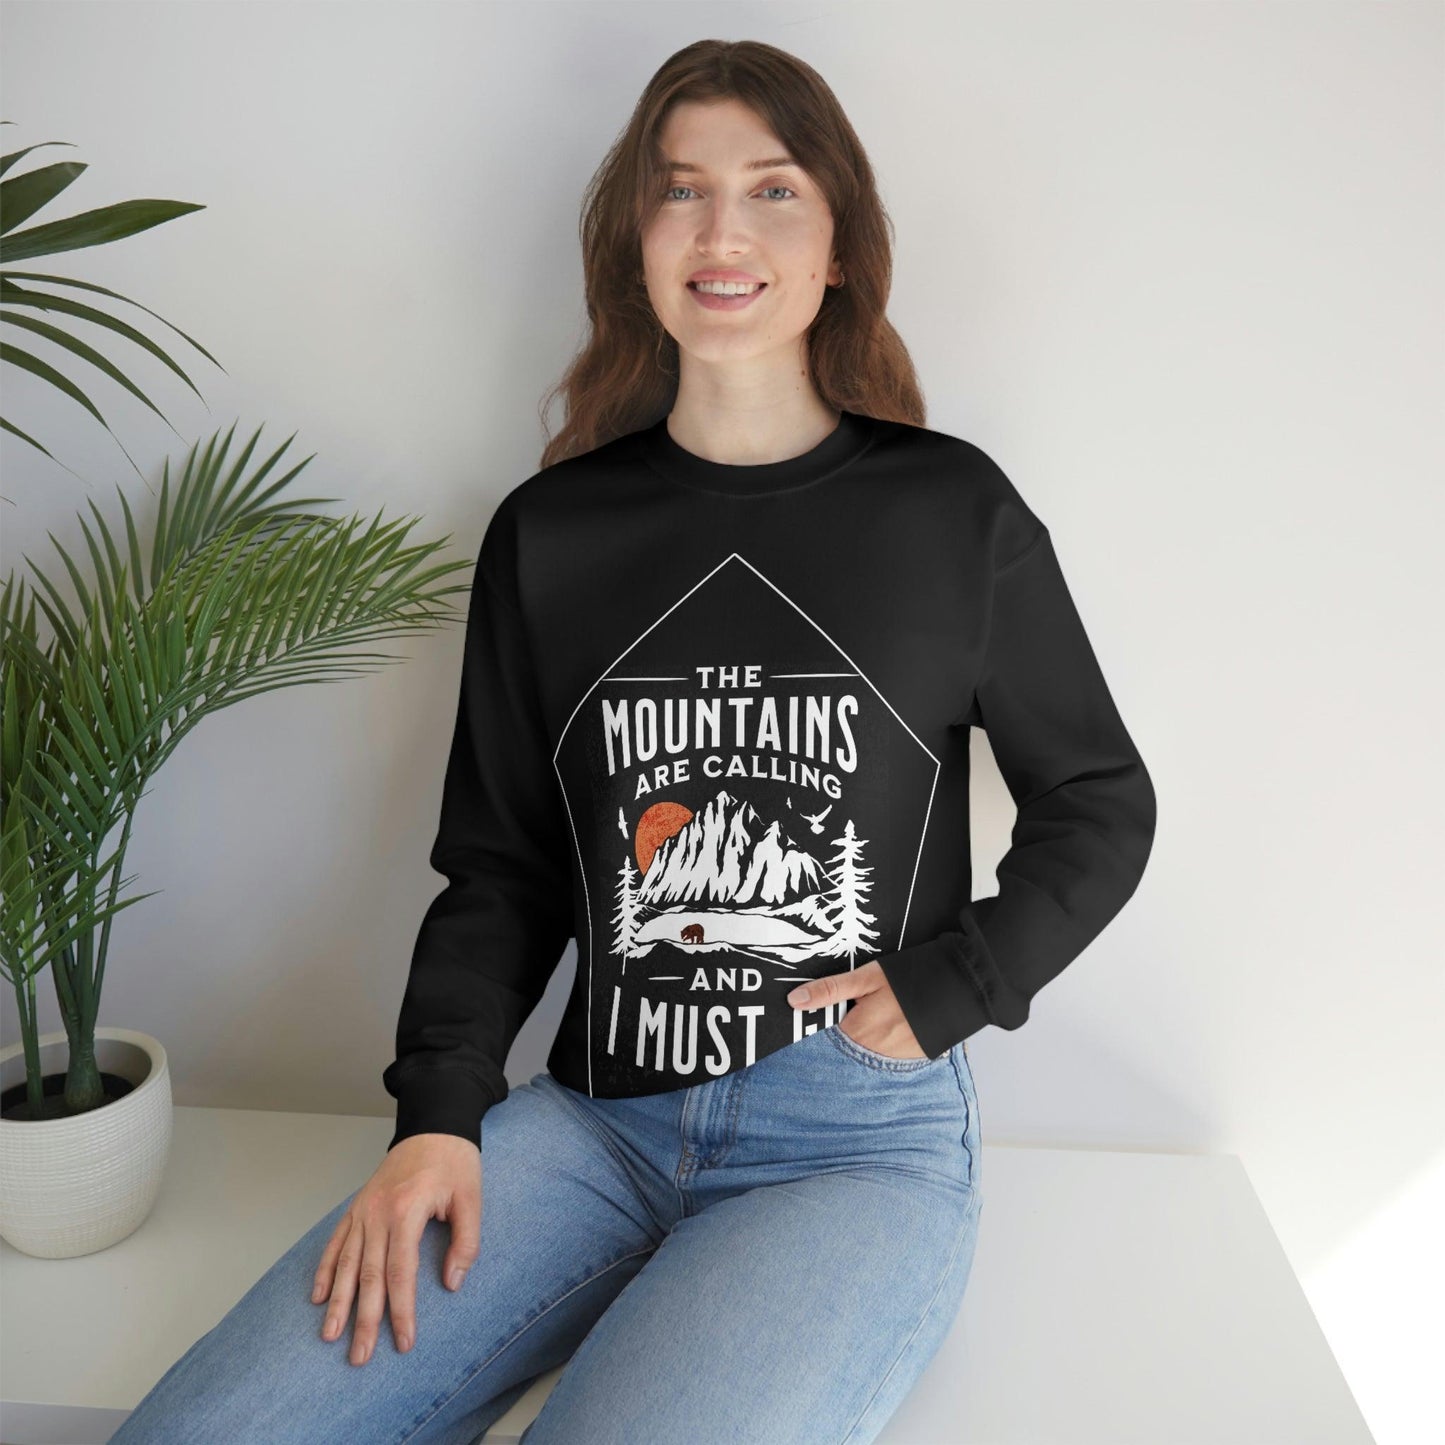 The Mountains are Calling and I Must Go, Crewneck Sweatshirt